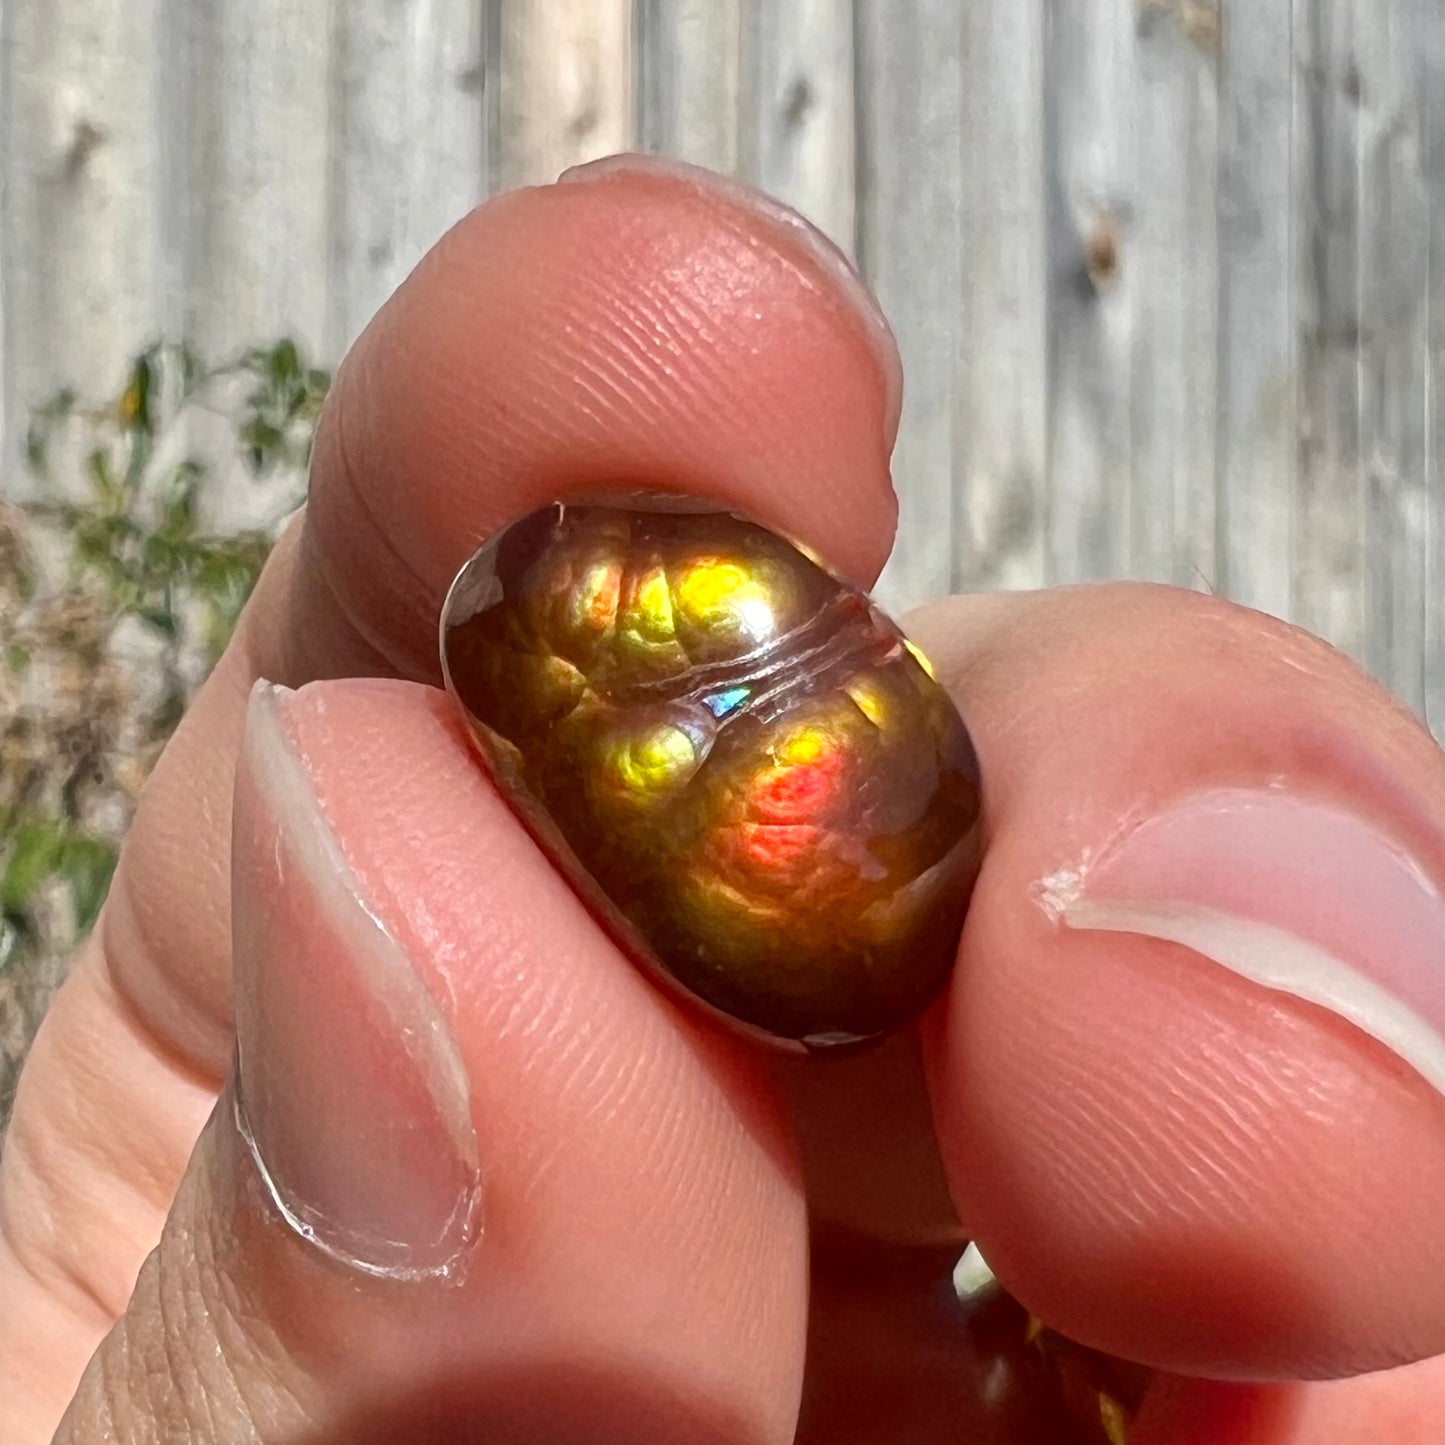 A loose Mexican fire agate cabochon.  The stone has a bright purple and blue iris pattern.